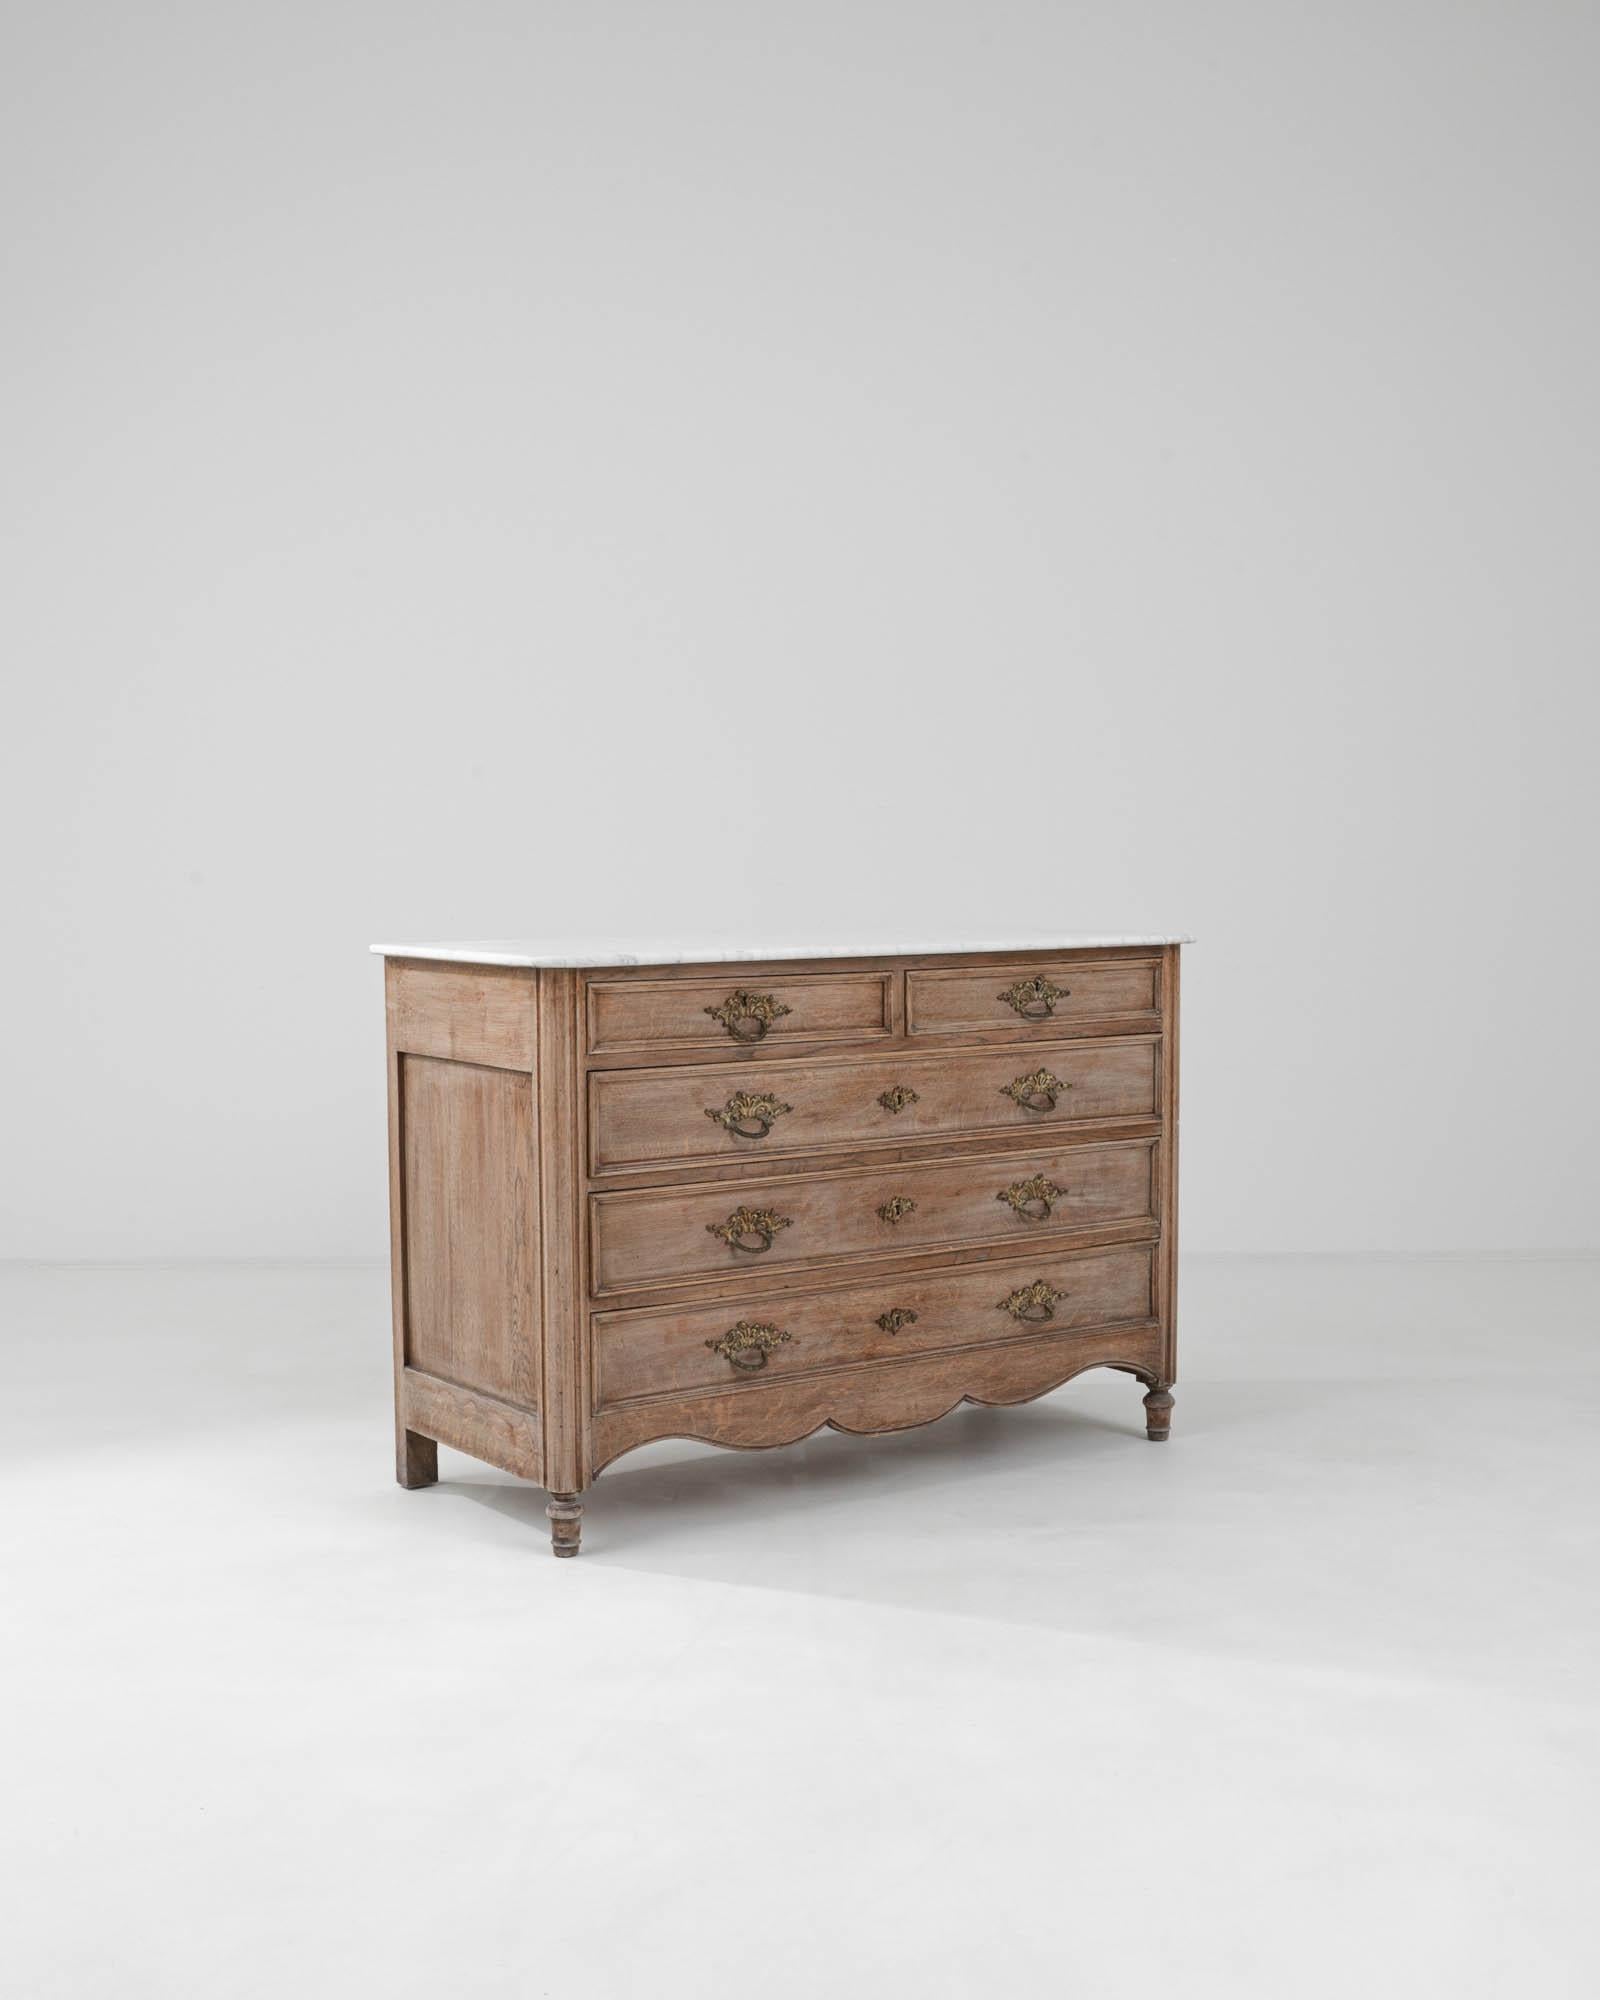 Enhance your home with the elegant sophistication of this 19th Century French Wooden Chest of Drawers, crowned with a luxurious marble top. This exquisite piece features a graceful serpentine front and is adorned with intricate, ornate metal pulls